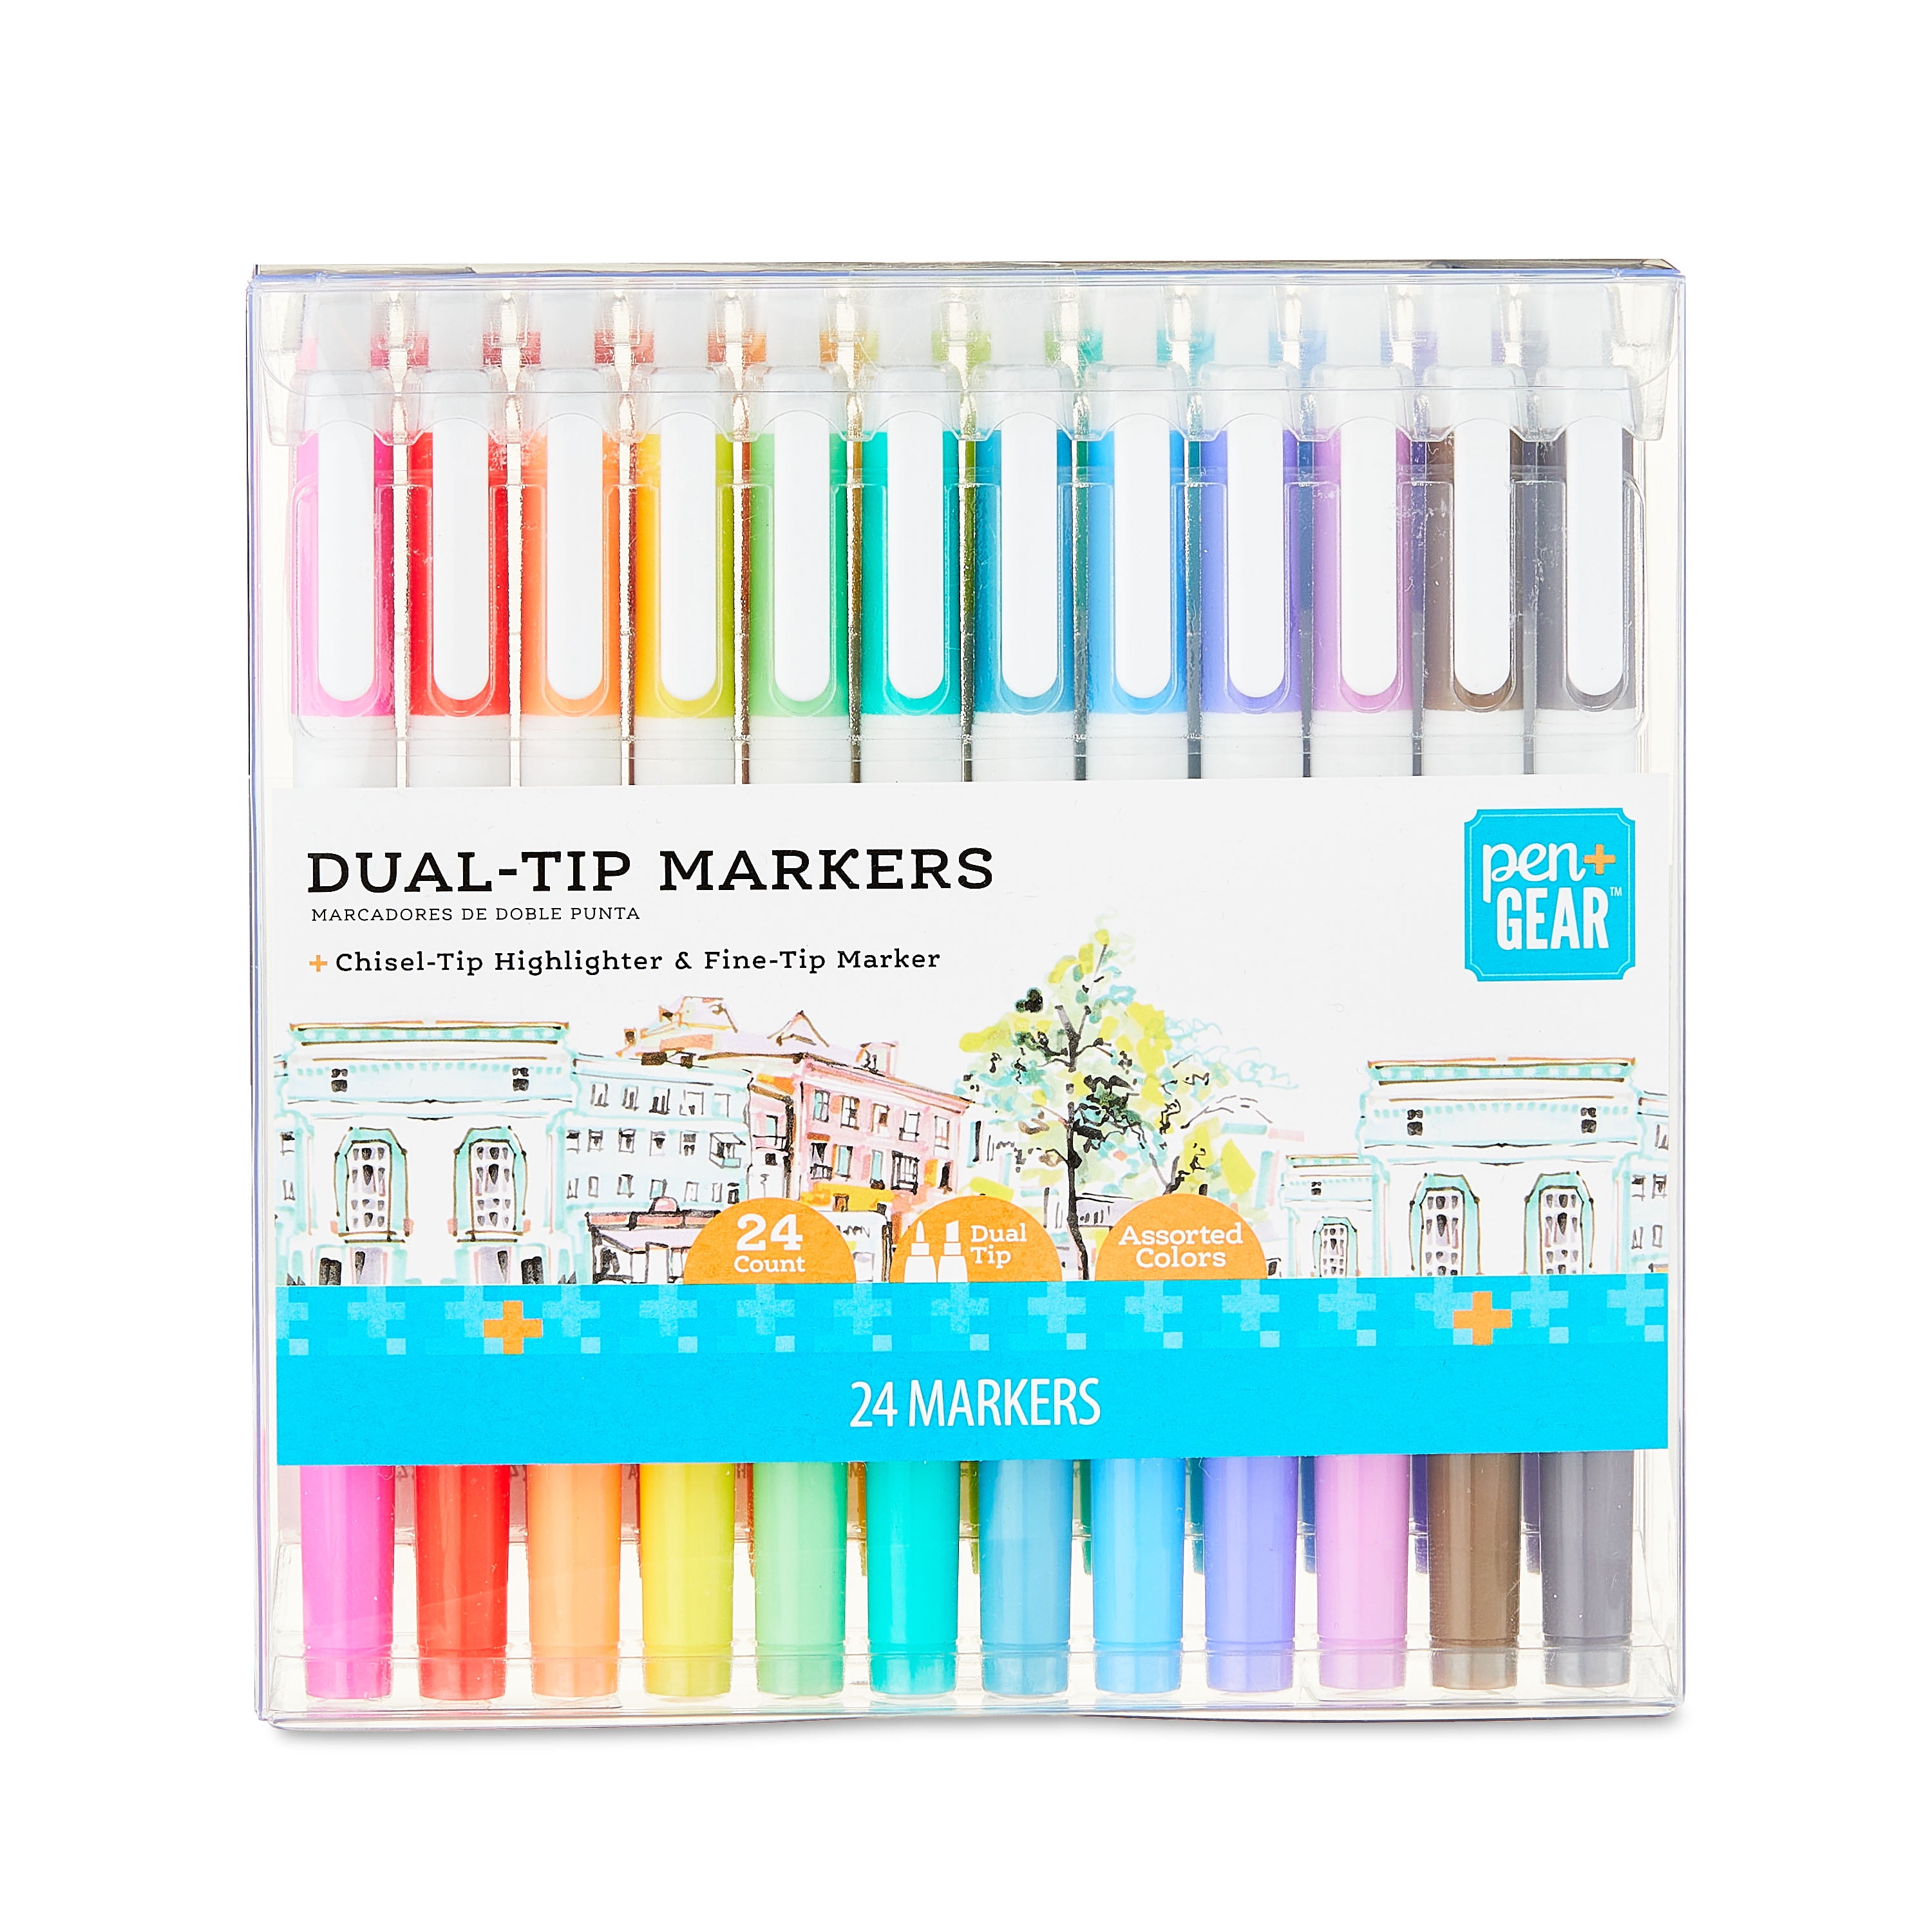 Pen+Gear Dual End Art Markers, Assorted Colors, 24 Count